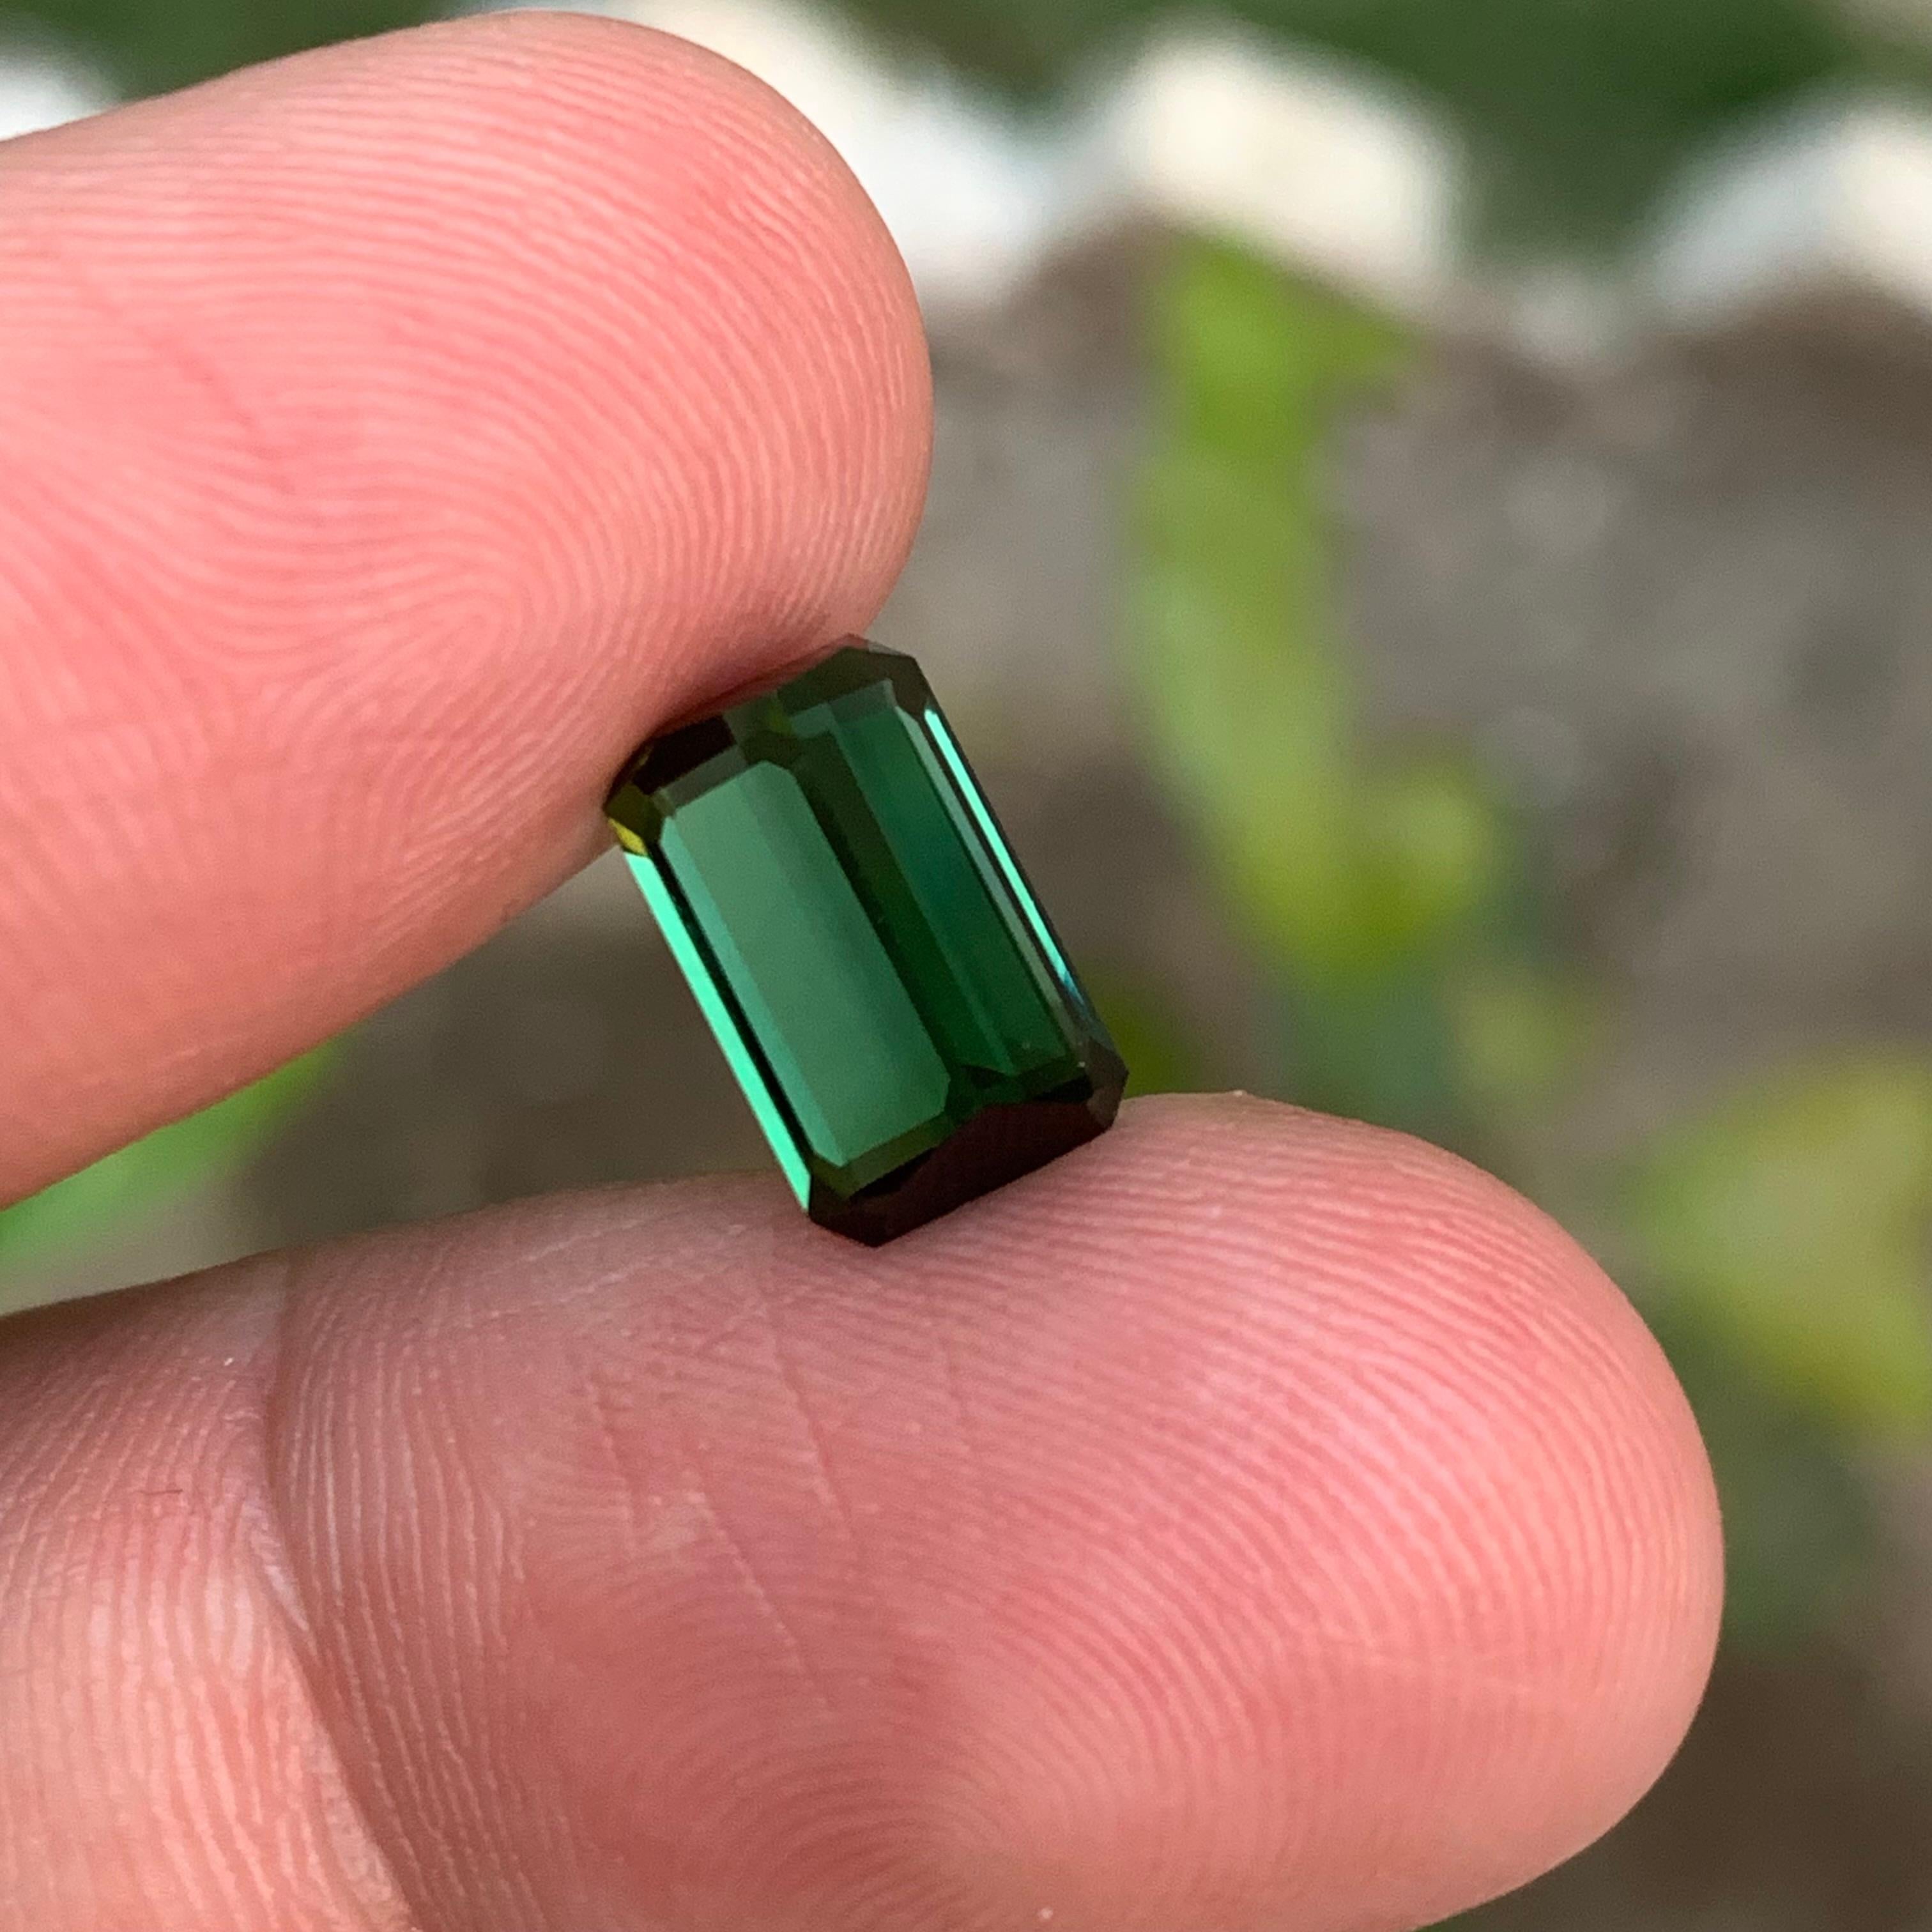 Rare Deep Green Natural Tourmaline Loose Gemstone, 3.75 Ct Emerald Cut for Ring For Sale 3